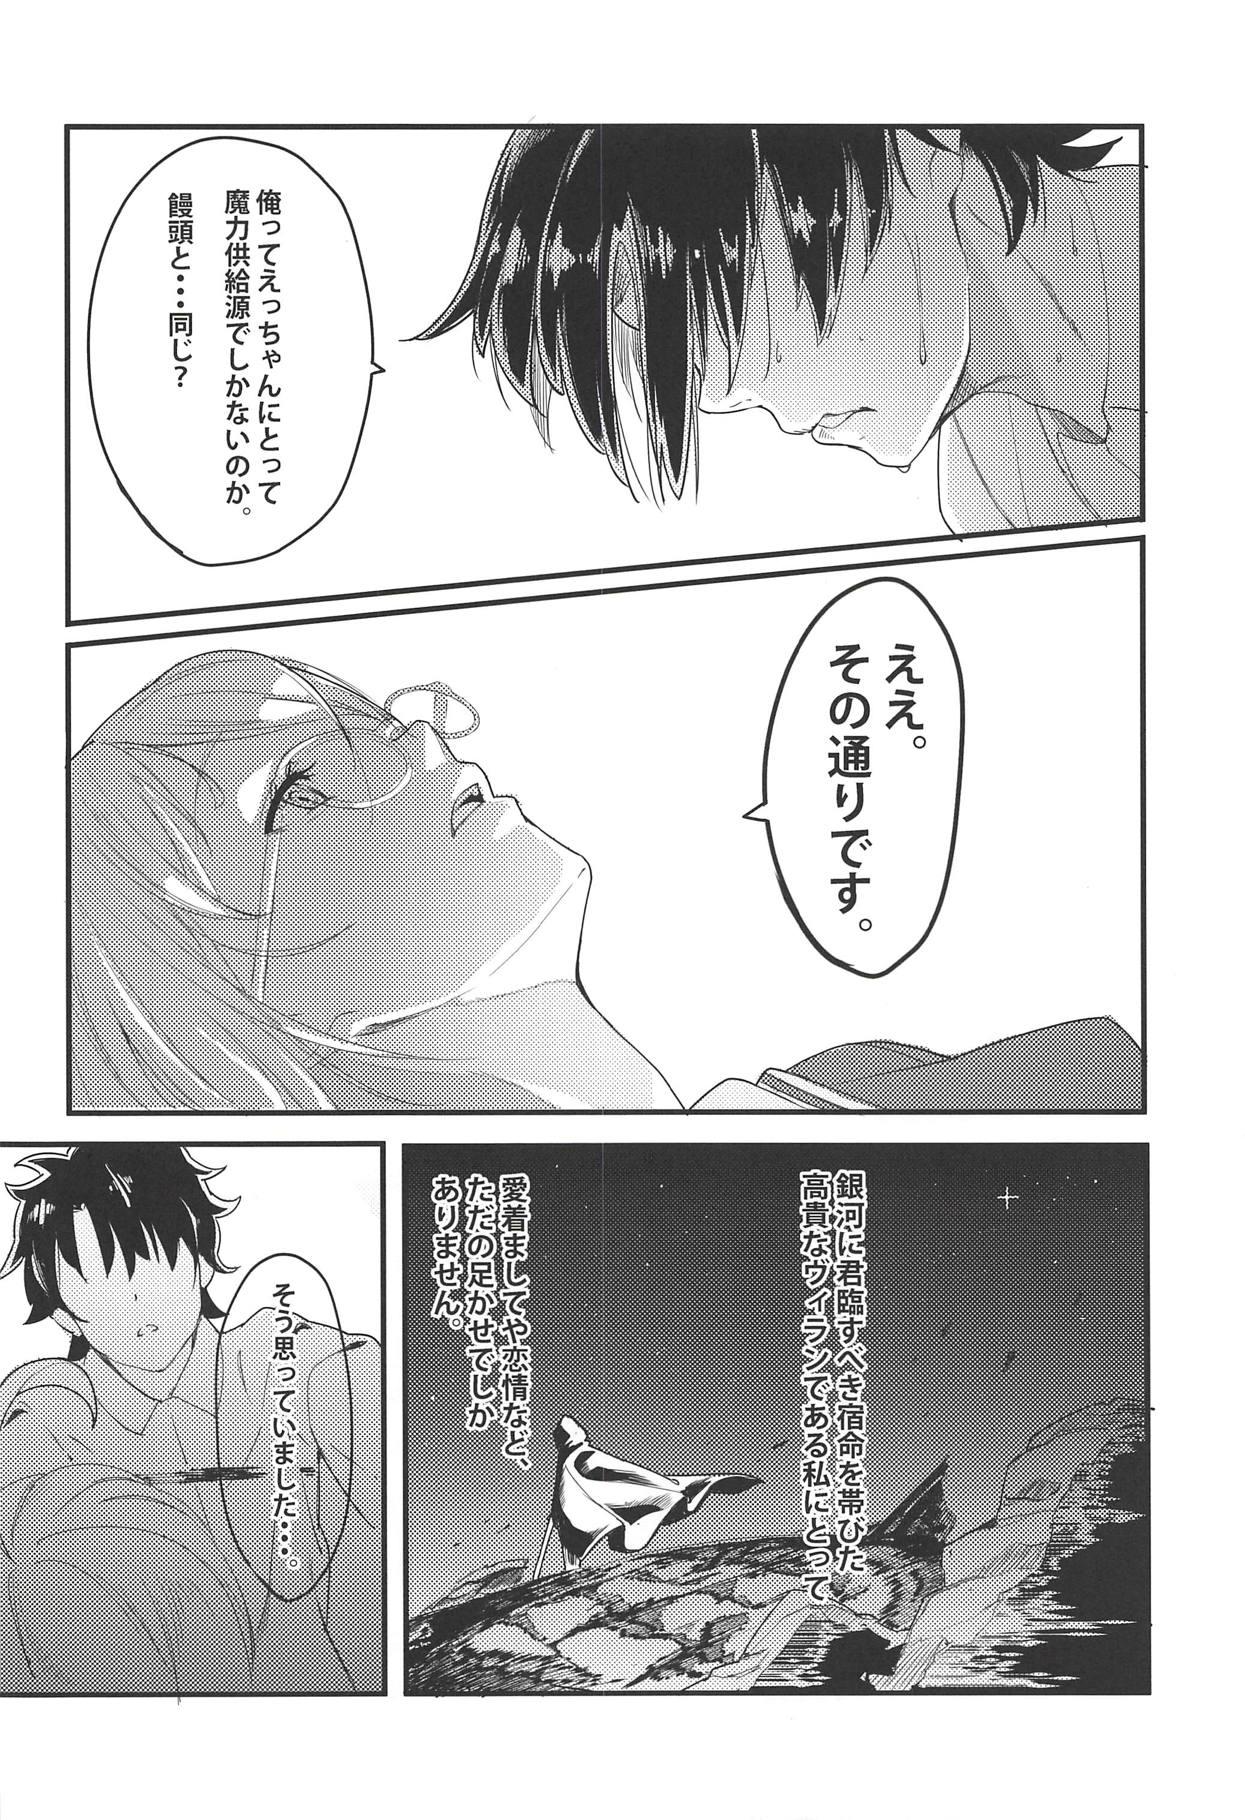 Wank SOMEWHERE OUT IN SPACE - Fate grand order Facial Cumshot - Page 7